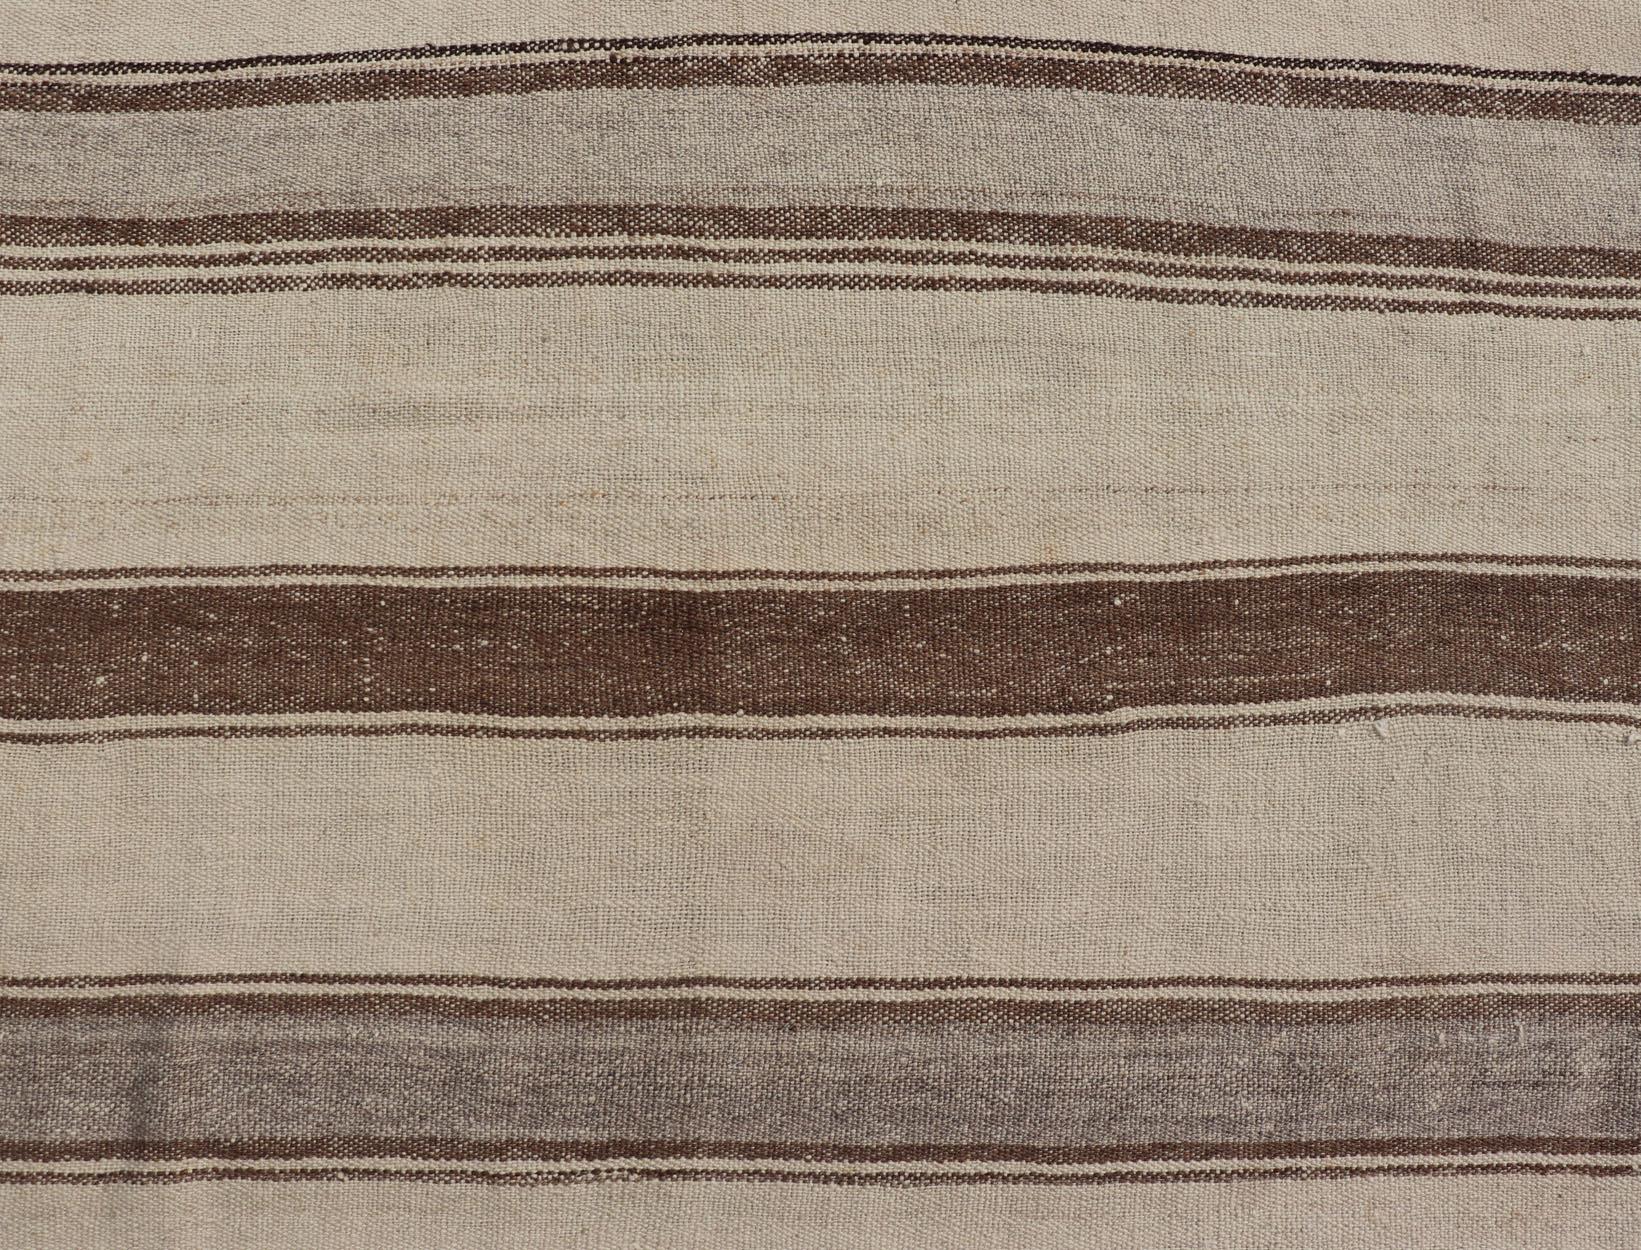 Vintage Turkish Kilim with Vertical Stripes in Tan, Taupe, Grey, Cream and Brown For Sale 1